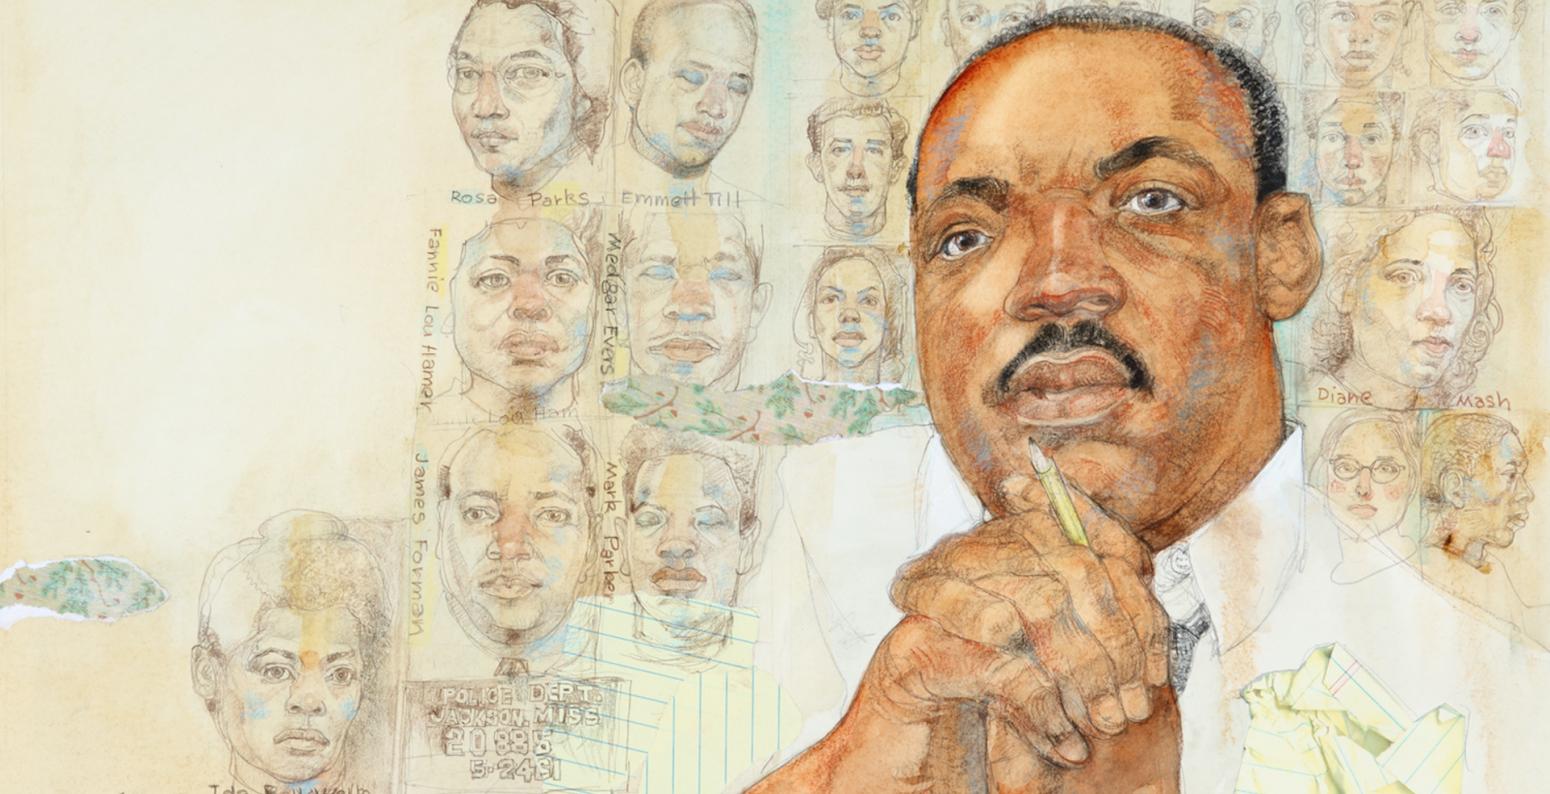 Watercolor illustration of Martin Luther King, Jr, by Jerry Pinkney